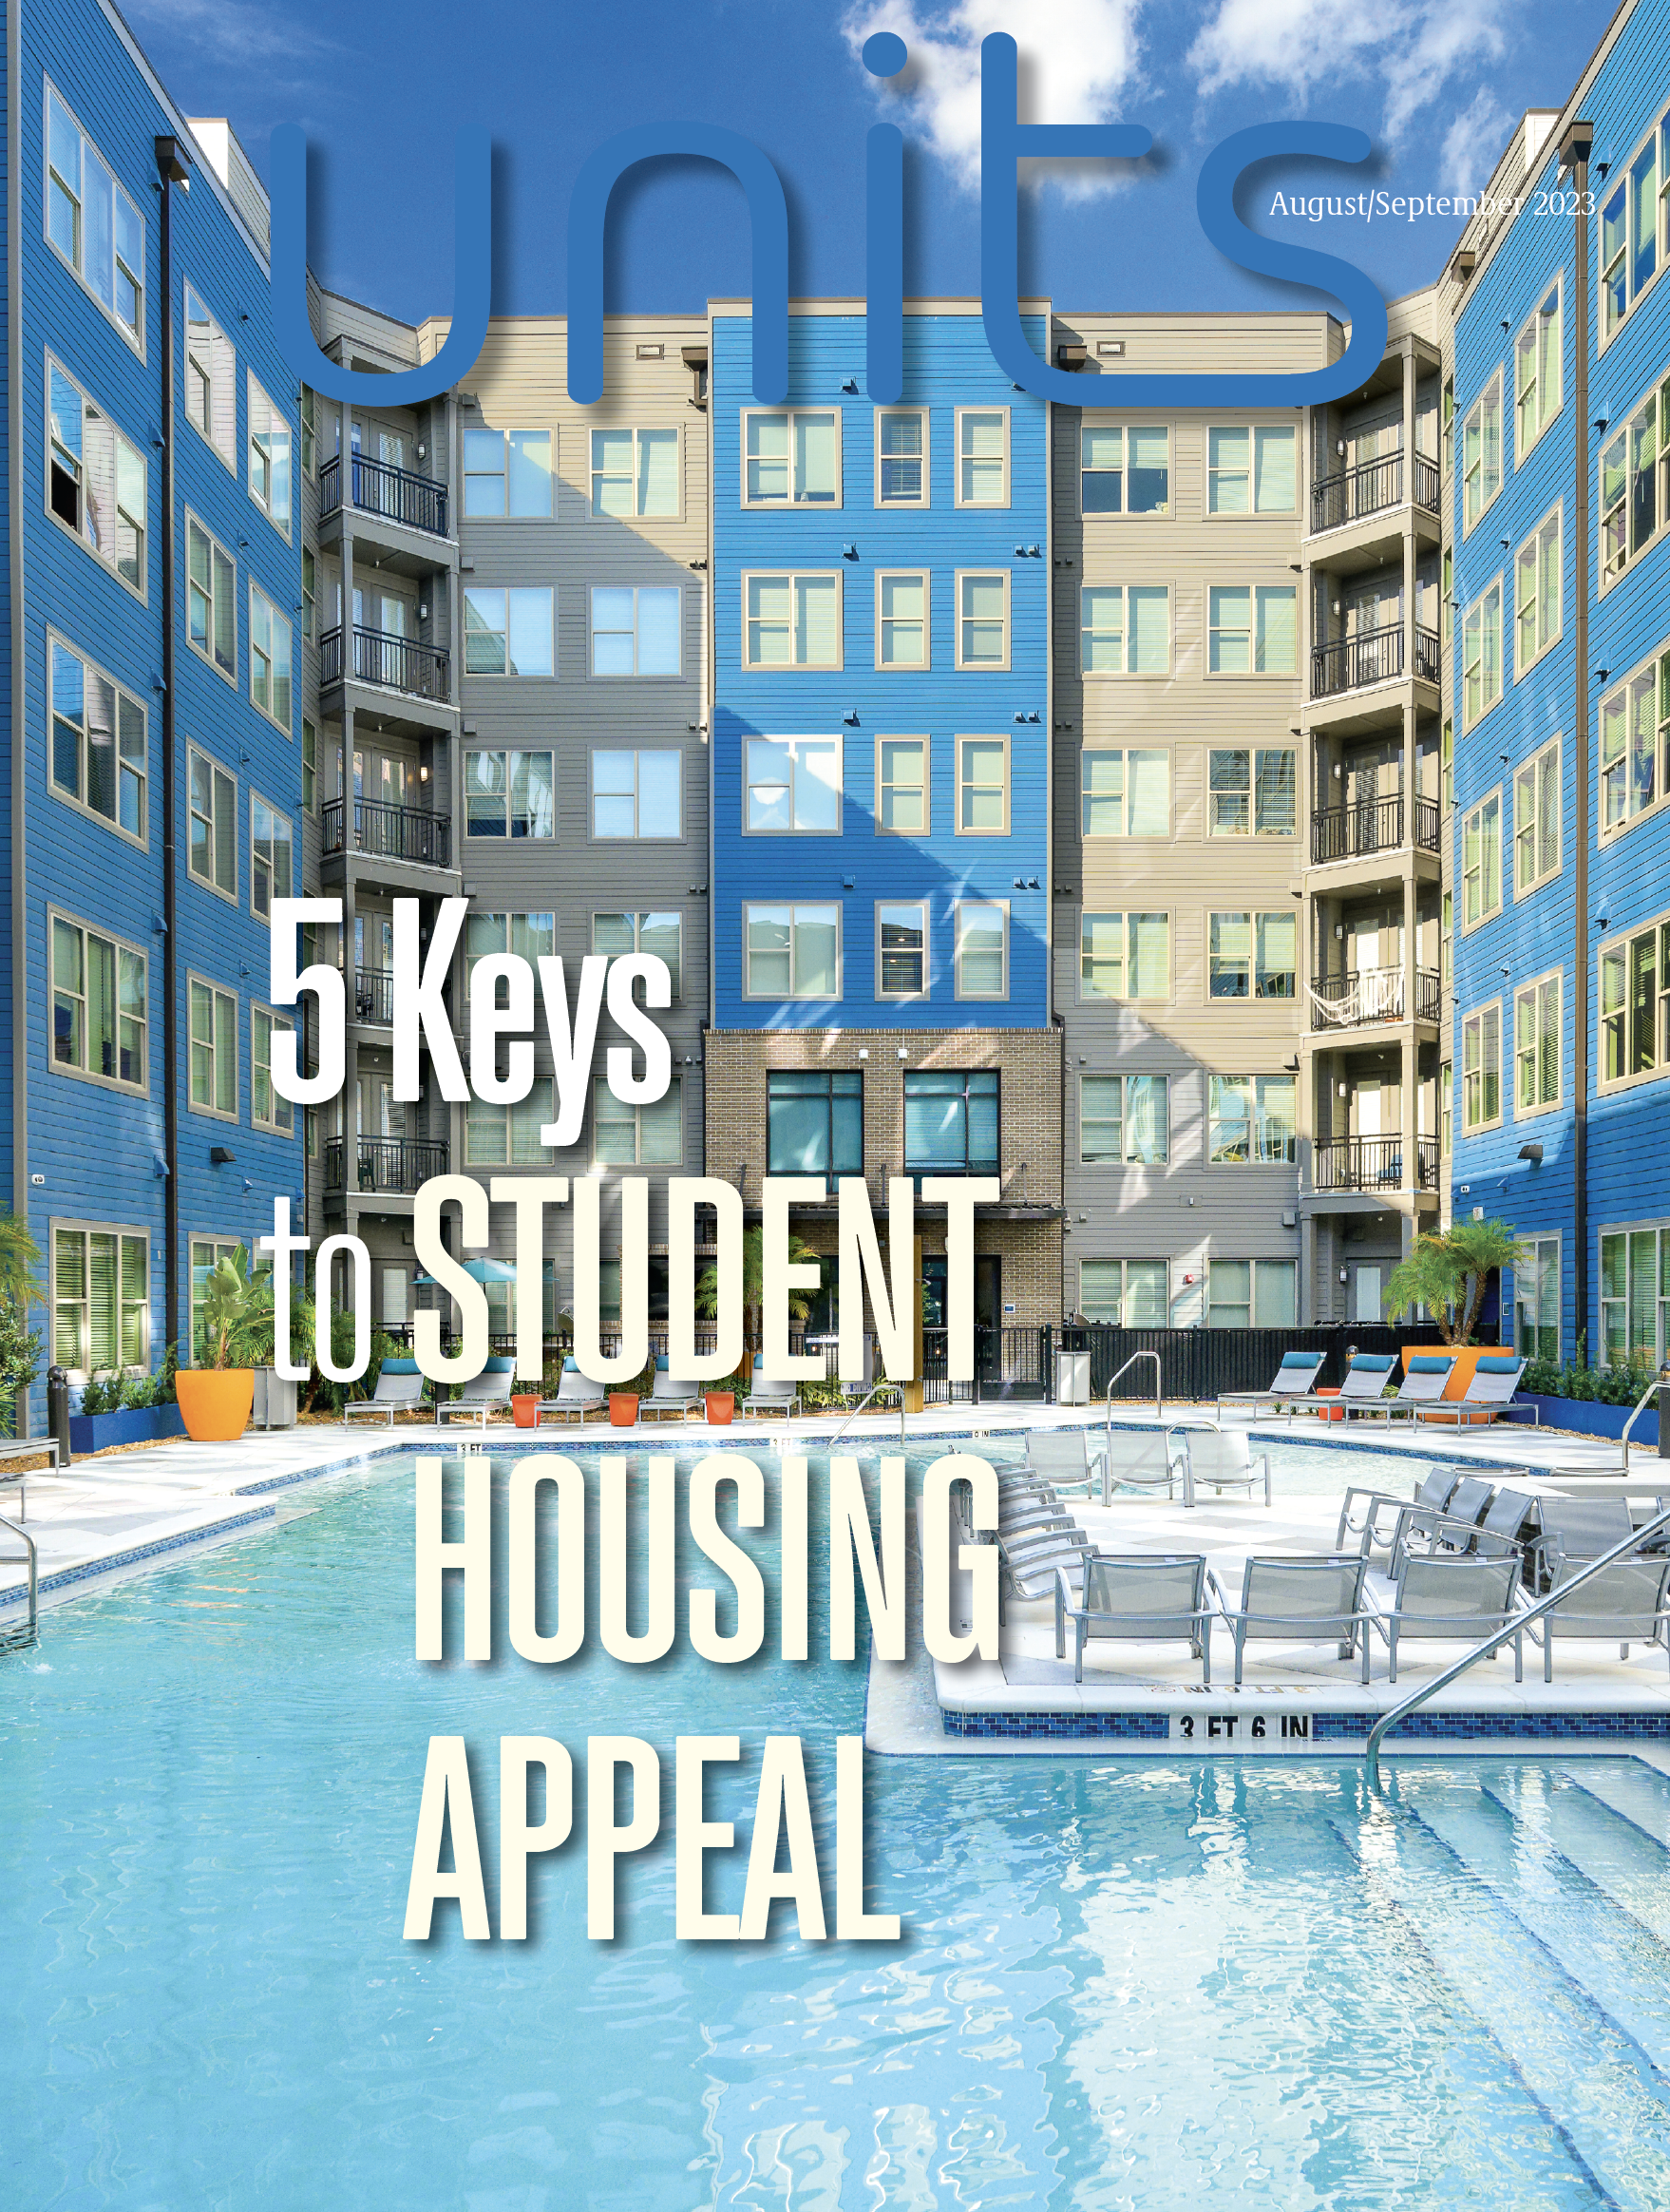 aug/sep cover of Units magazine - "5 keys to student housing appeal"